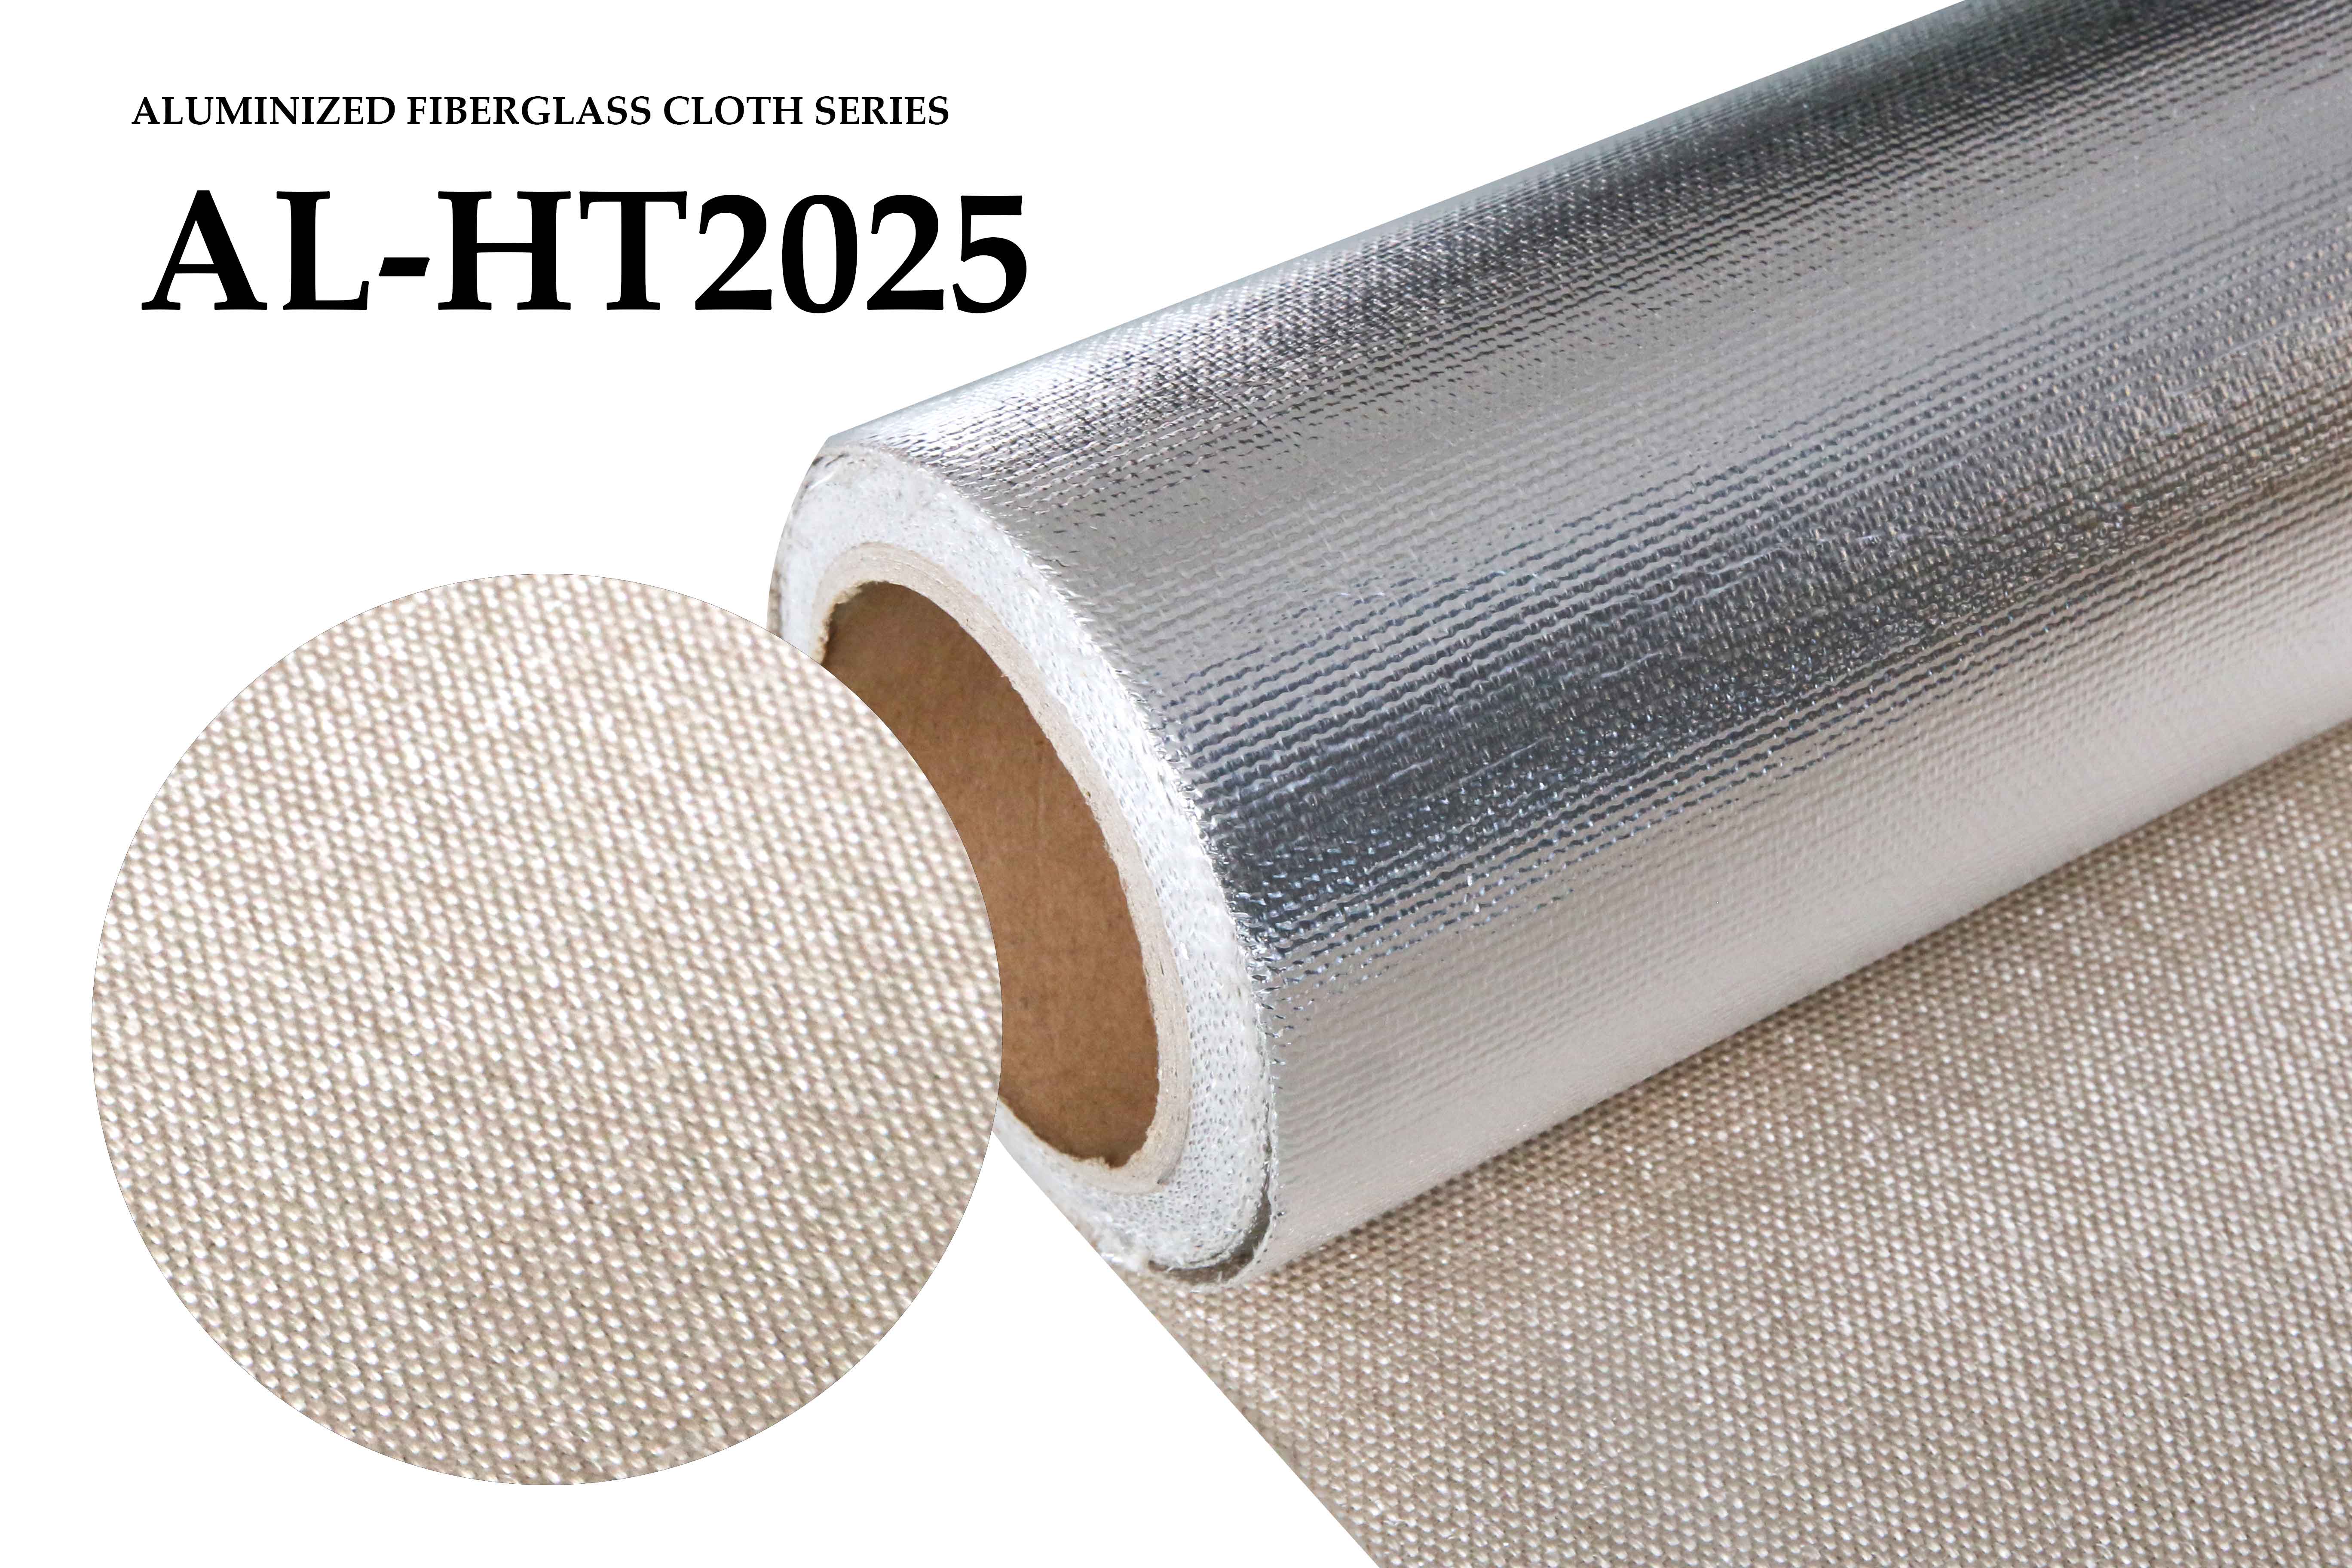 Insulated Glass Fiber Cloth Tape And Aluminum Foil Can Be Used As Fire Blanket Felt